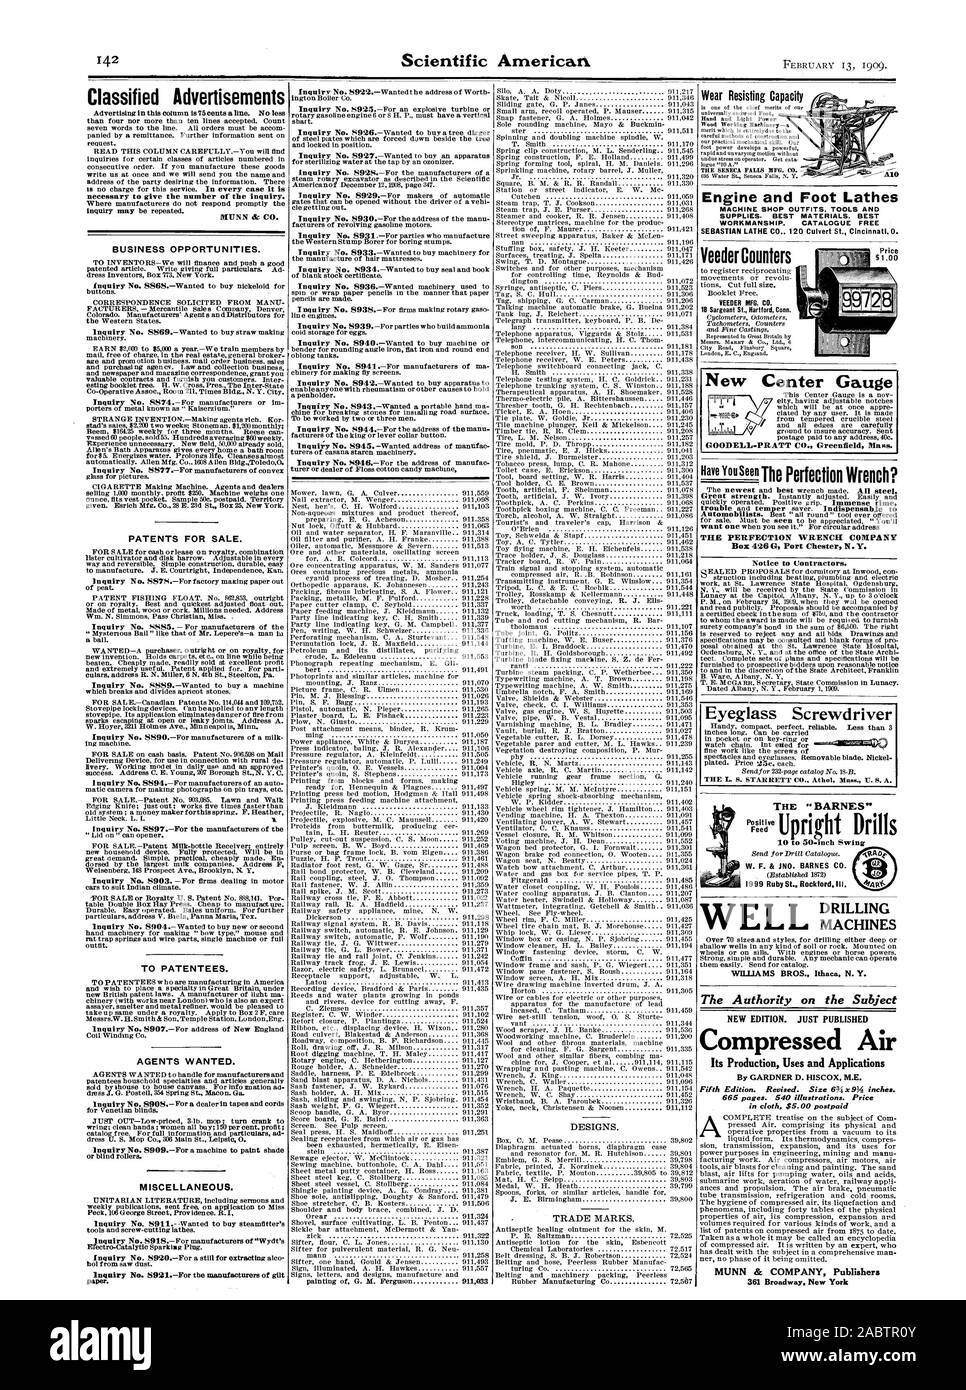 Classified Advertisements Advertising in this column is 75 cents a line. No less than four nor more than ten lines accepted. Count seven words to the line. All orders must be accom panied by a remittance. Further information sent on request. READ THIS COLUMN CAREFULLY.-You will find inquiries for certain classes of articles numbered in consecutive order. If you manufacture these goods write us at once and we will send you the name and address of the party desiring the information. There necessary to give the number of the inquiry. Where manufacturers do not respond promptly the BUSINESS Stock Photo